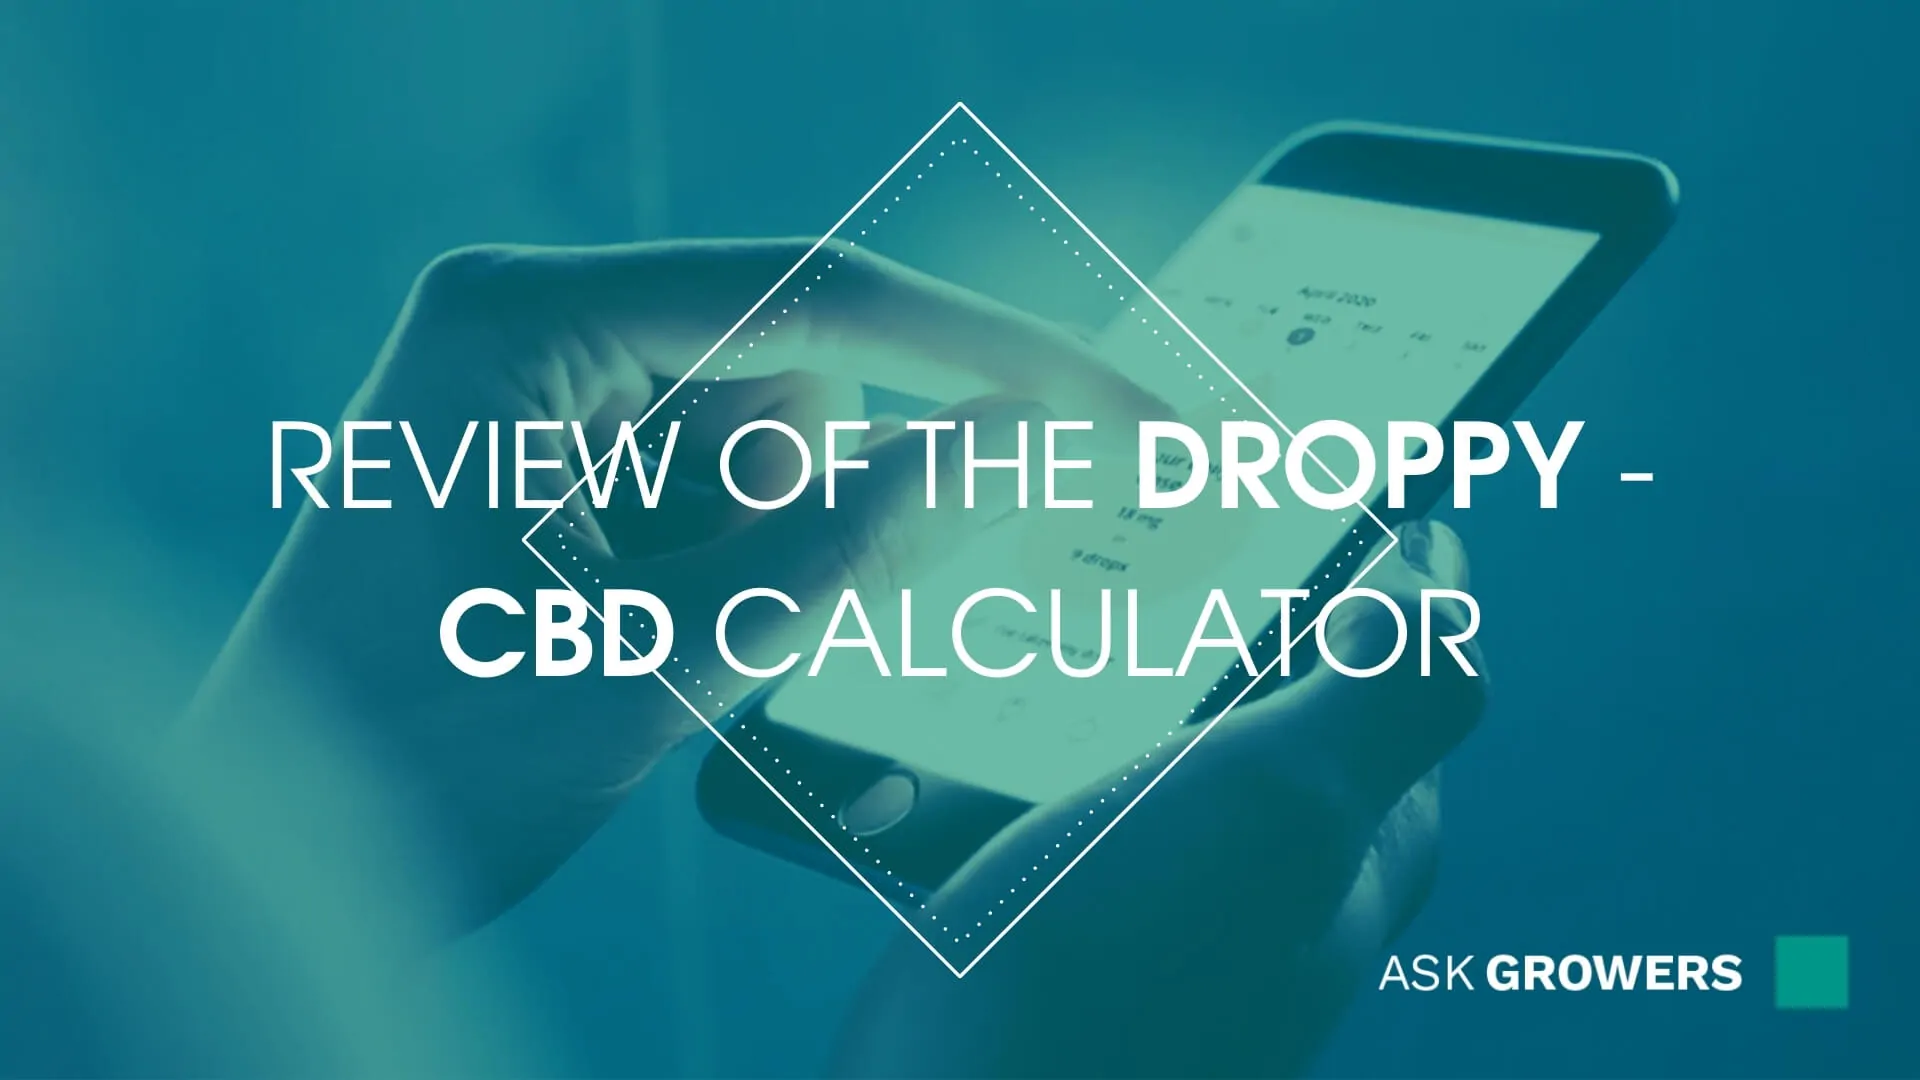 Review of "Droppy CBD Calculator" on AskGrowers.com